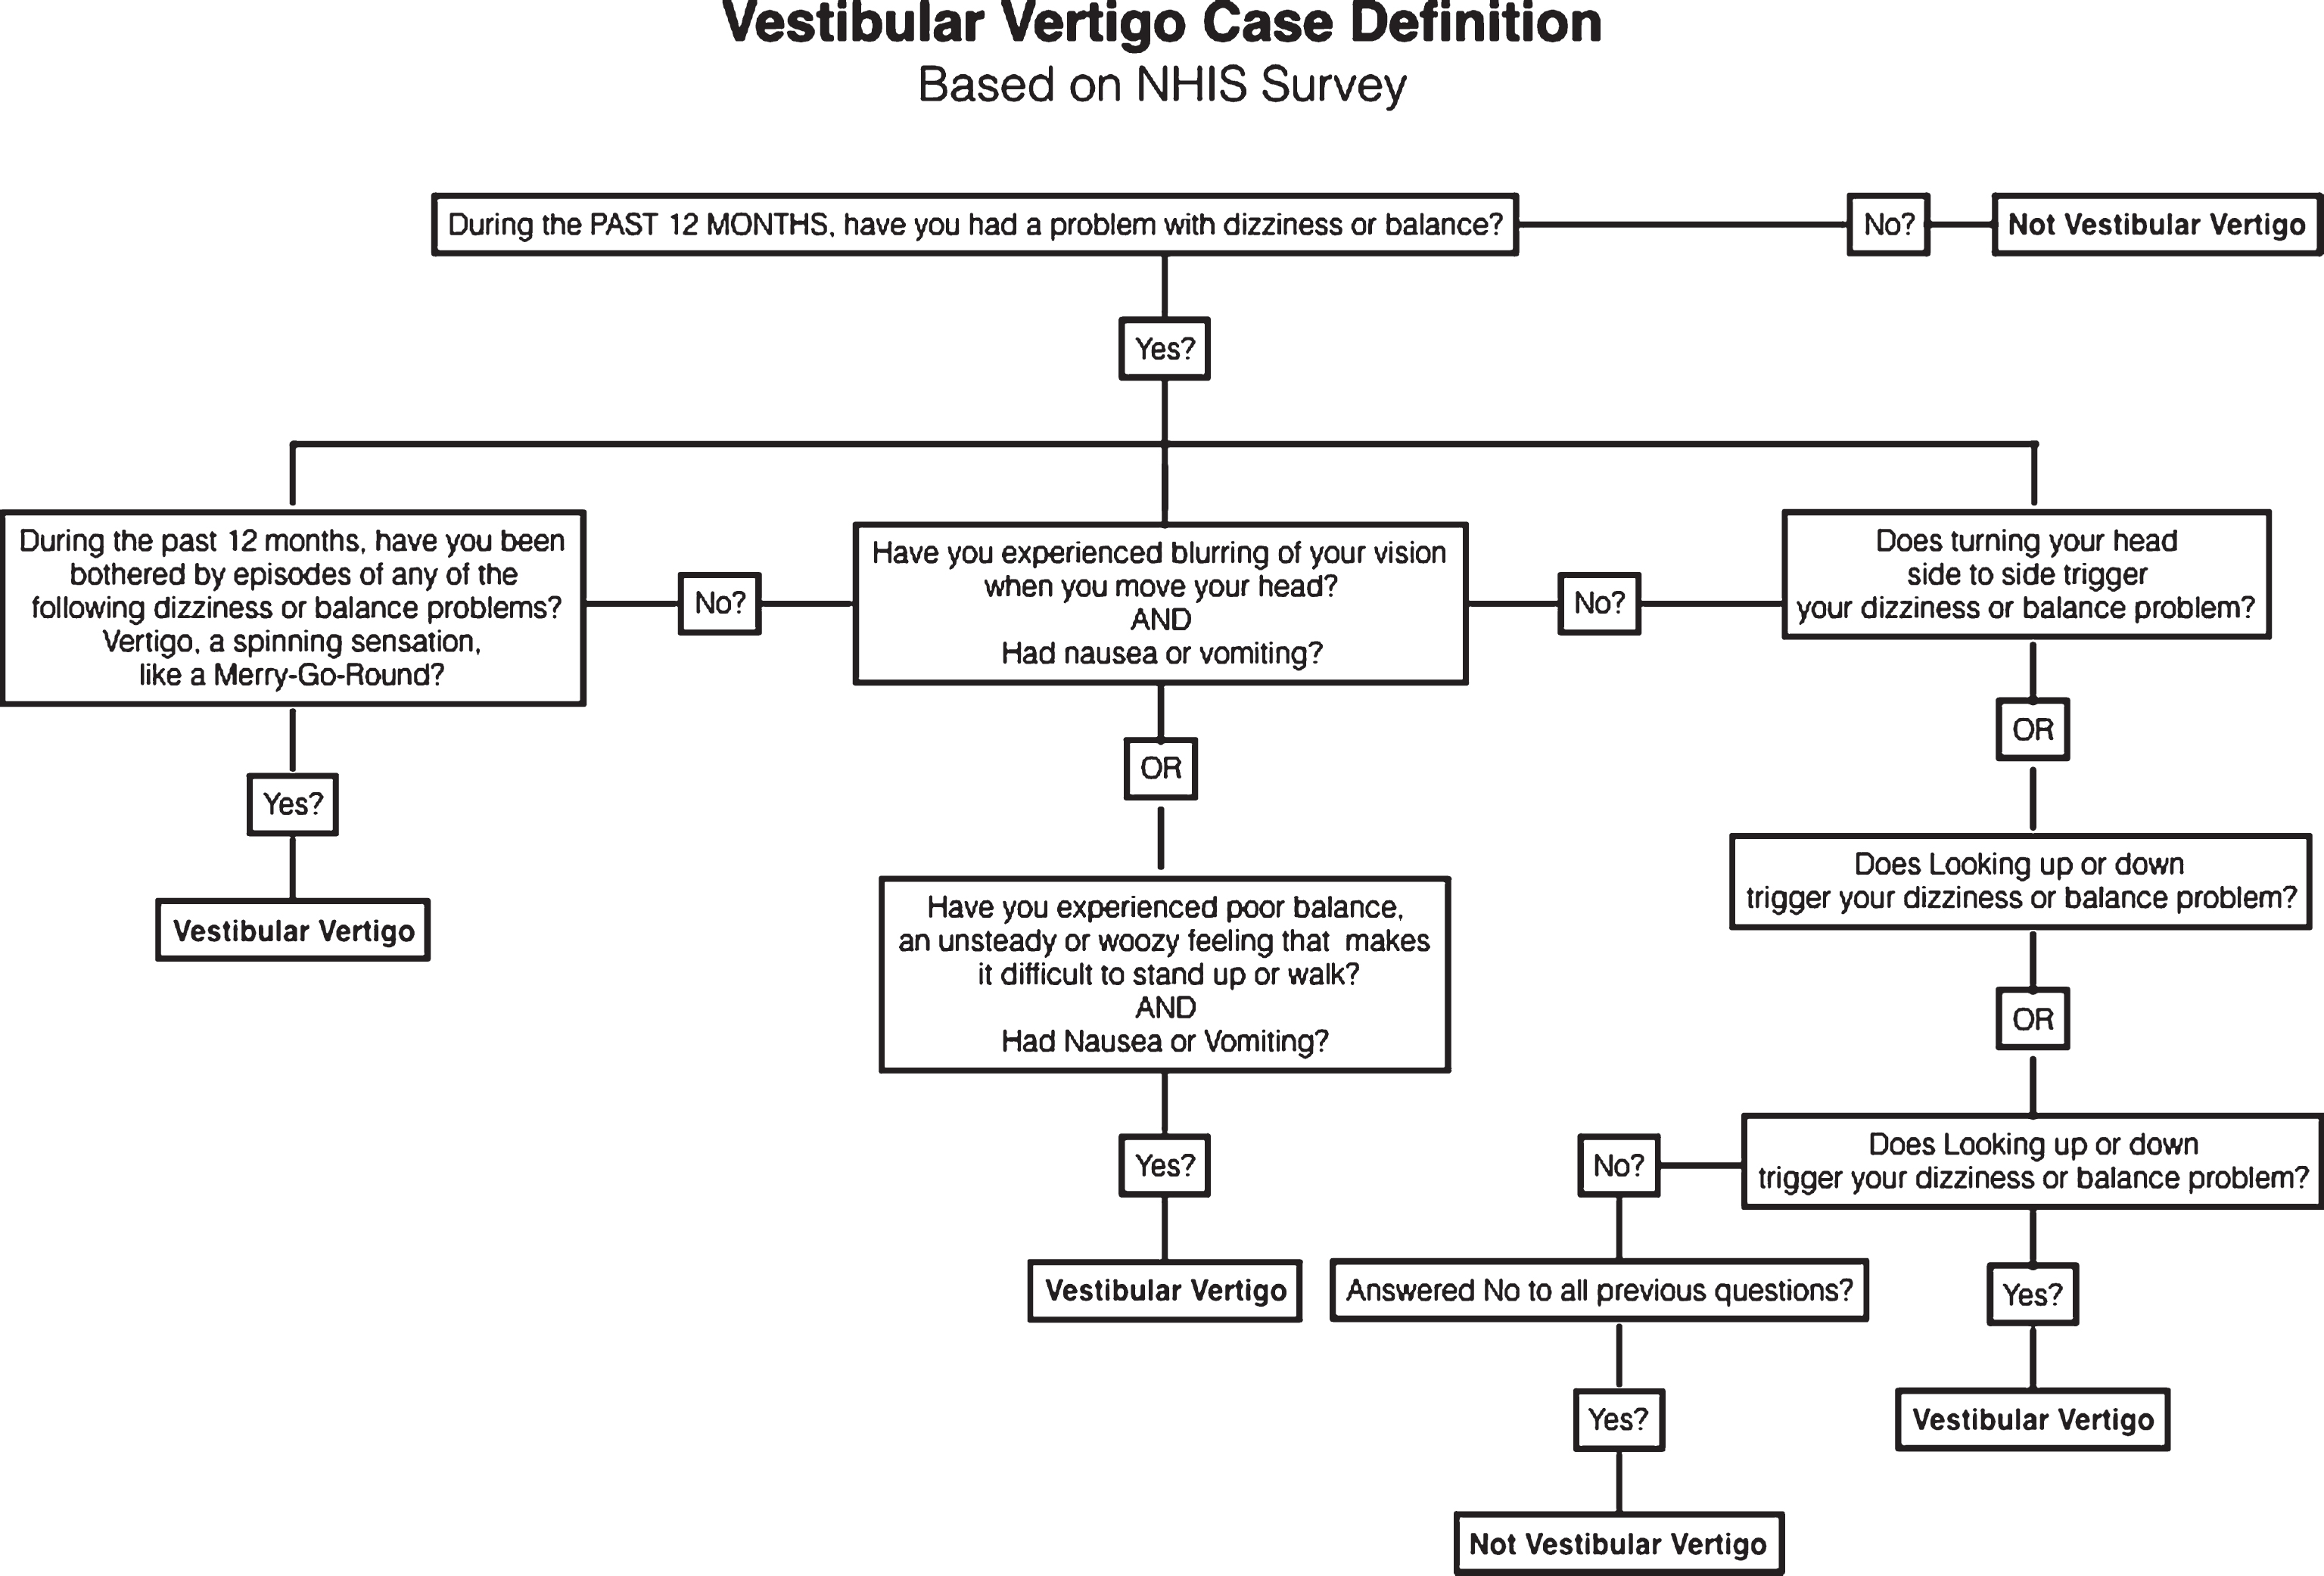 A flowchart illustrating the case definition for vestibular vertigo from the 2008 National Health Interview Survey. Patients were excluded from the vestibular vertigo definition if they history of any of the following: stroke, movement disorder, multiple sclerosis, spine injury, muscular dystrophy, macular degeneration, glaucoma, diabetic retinopathy, or cataract.